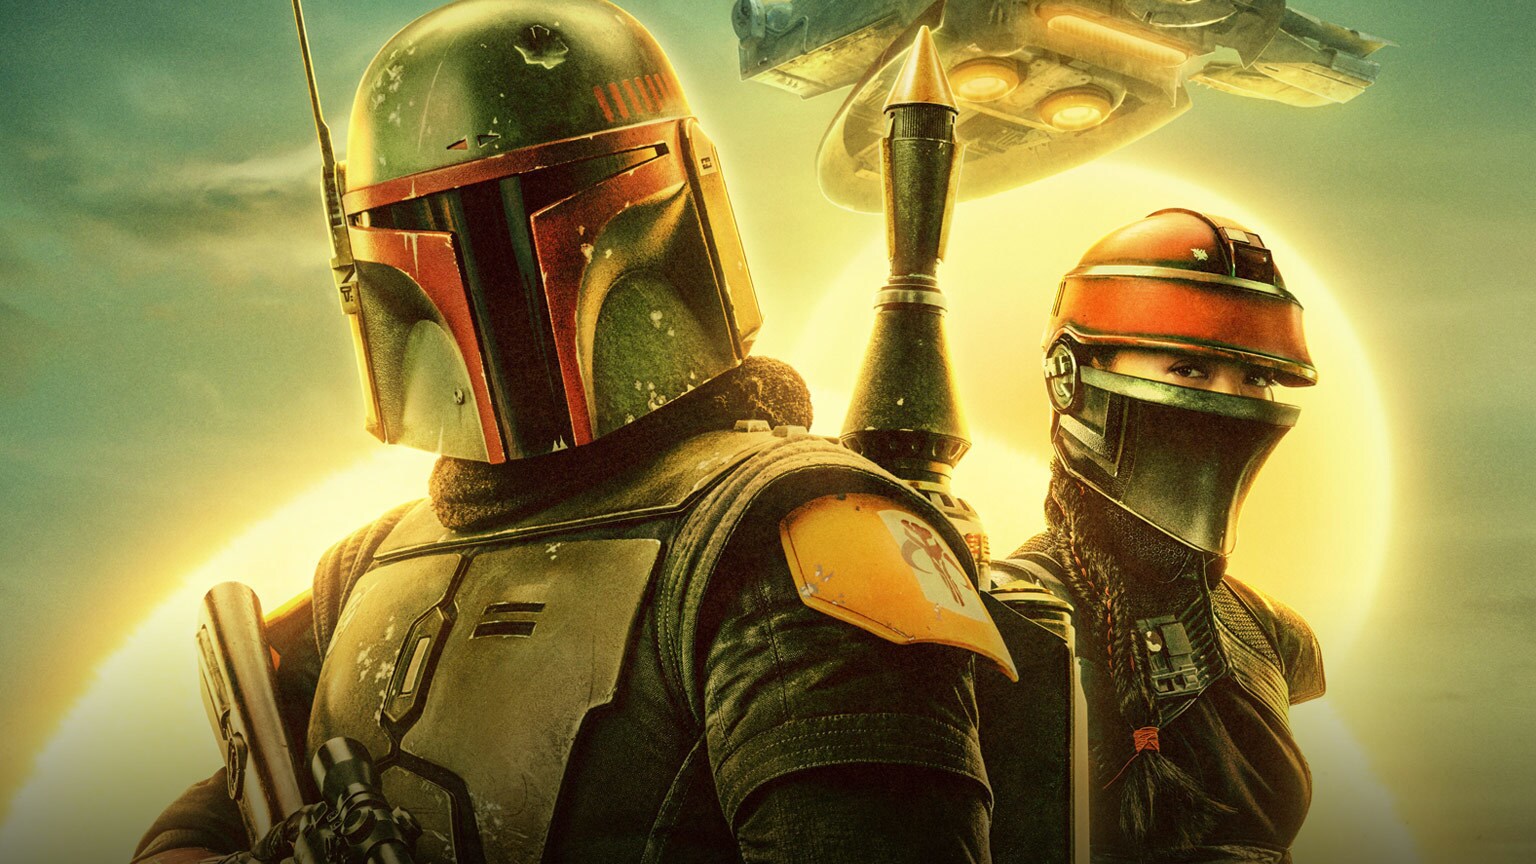 6 Highlights from The Book of Boba Fett Trailer